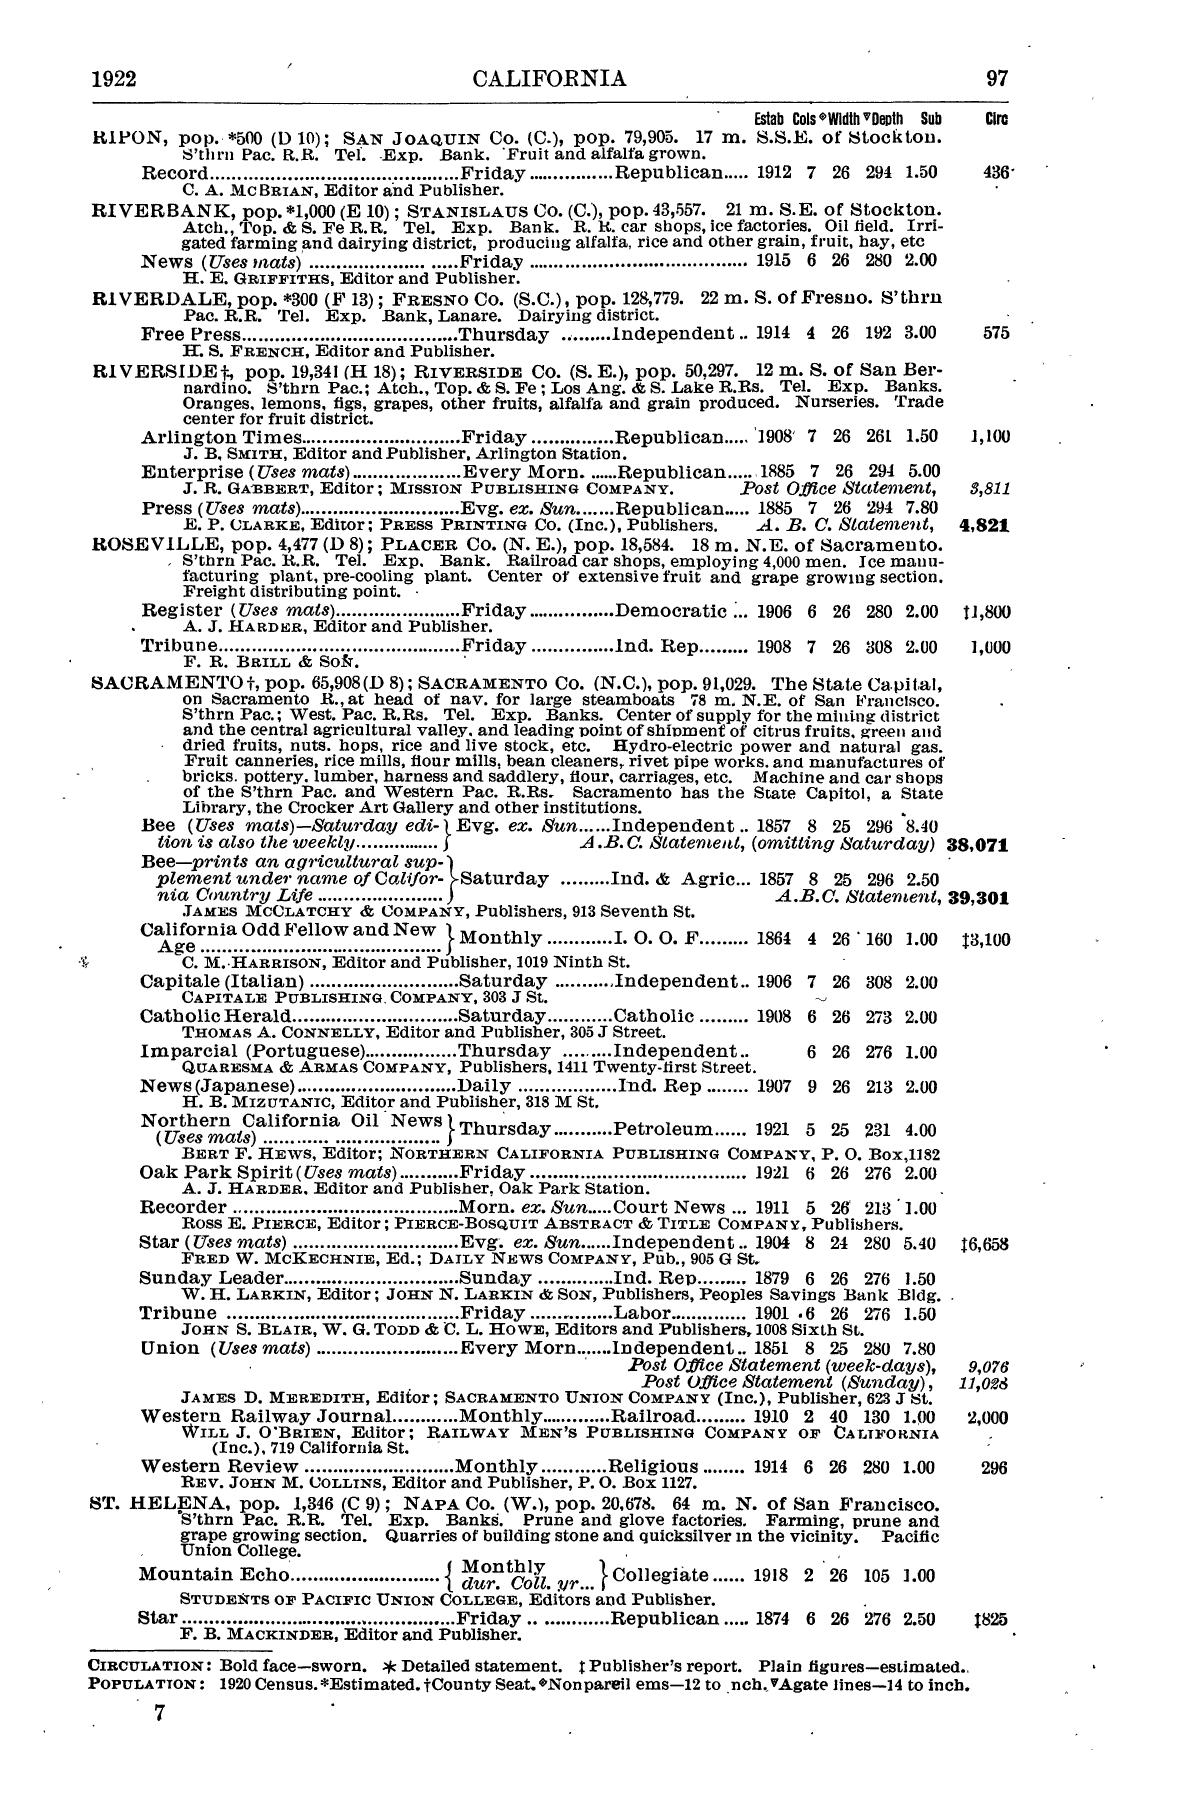 N. W. Ayer & Son's American Newspaper Annual and Directory: A Catalogue of American Newspapers, 1922, Volume 1
                                                
                                                    97
                                                